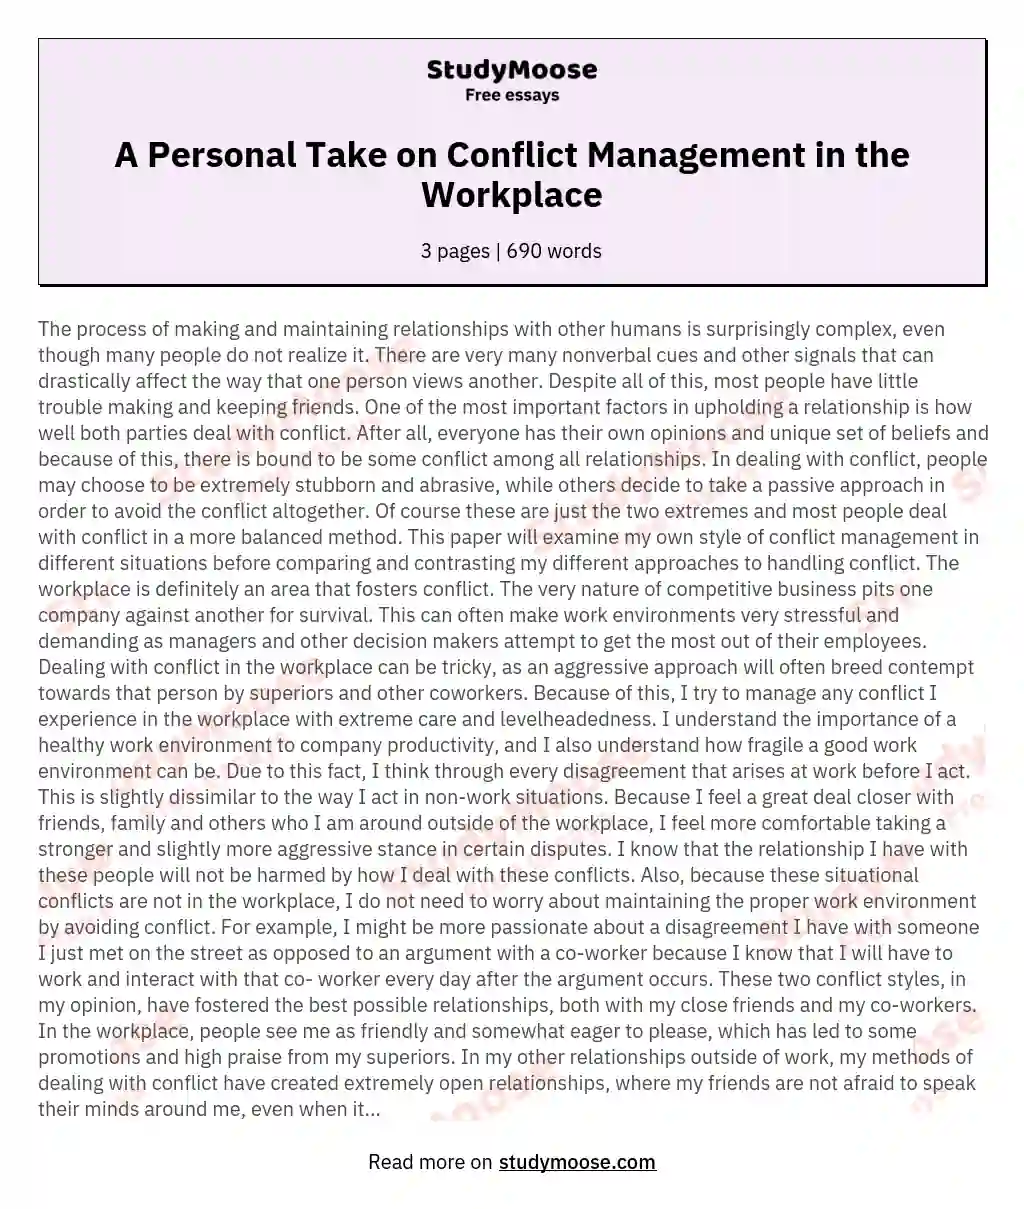 A Personal Take on Conflict Management in the Workplace essay